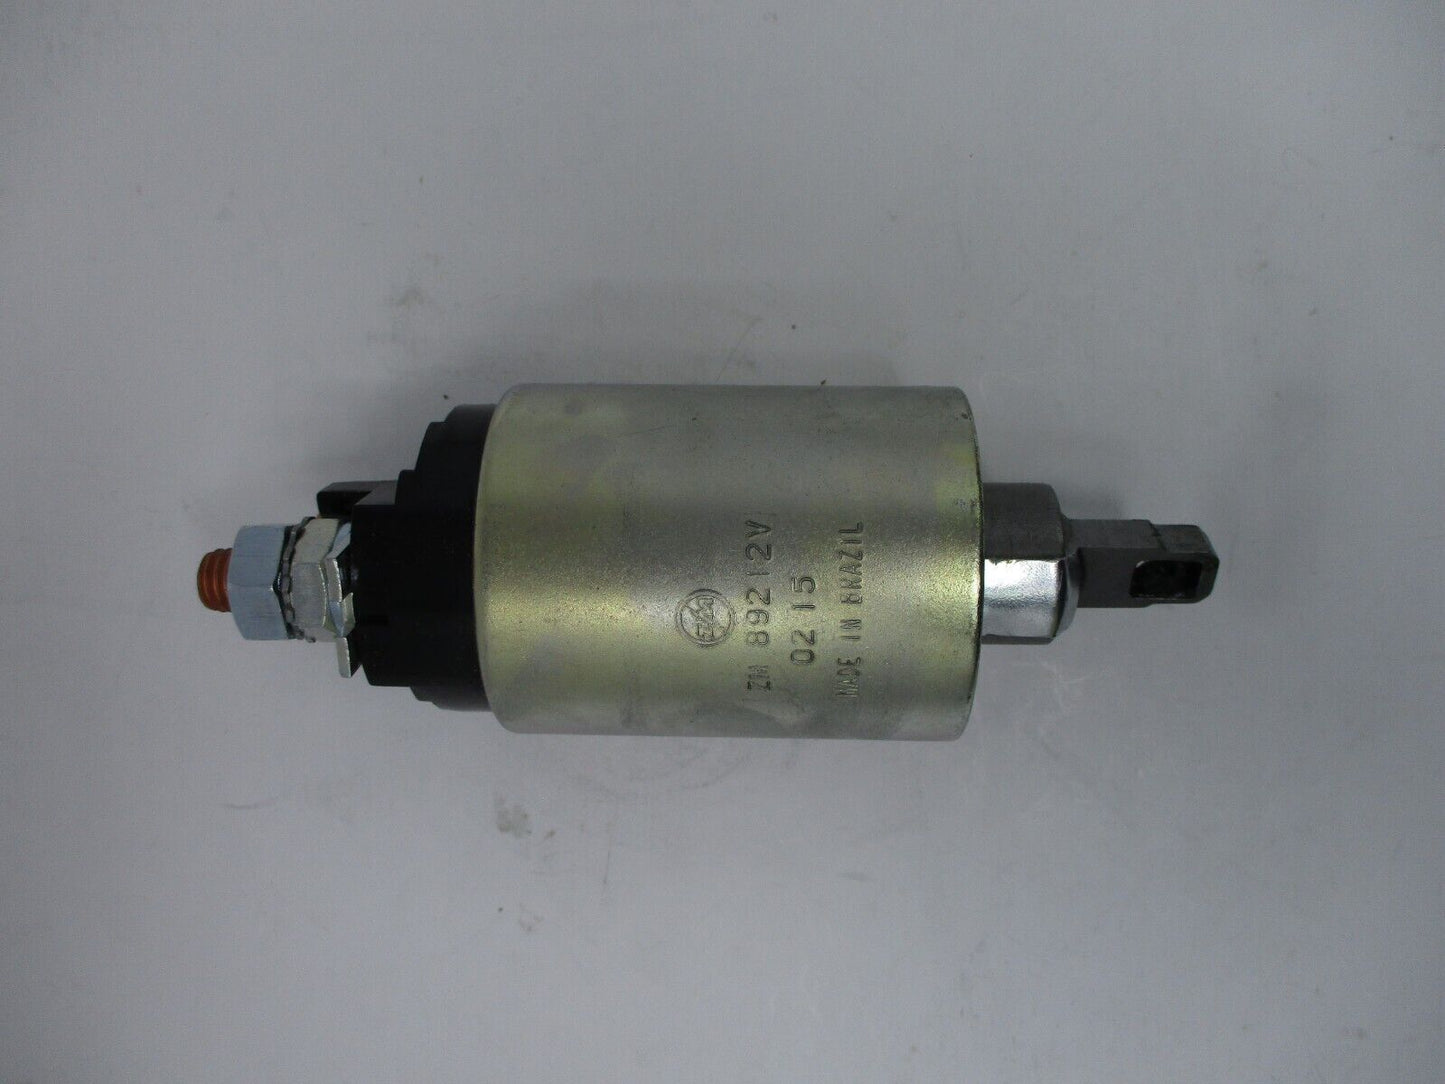 Solenoid Assembly Reverse 83857-09 for Harley-Davidson SS037S